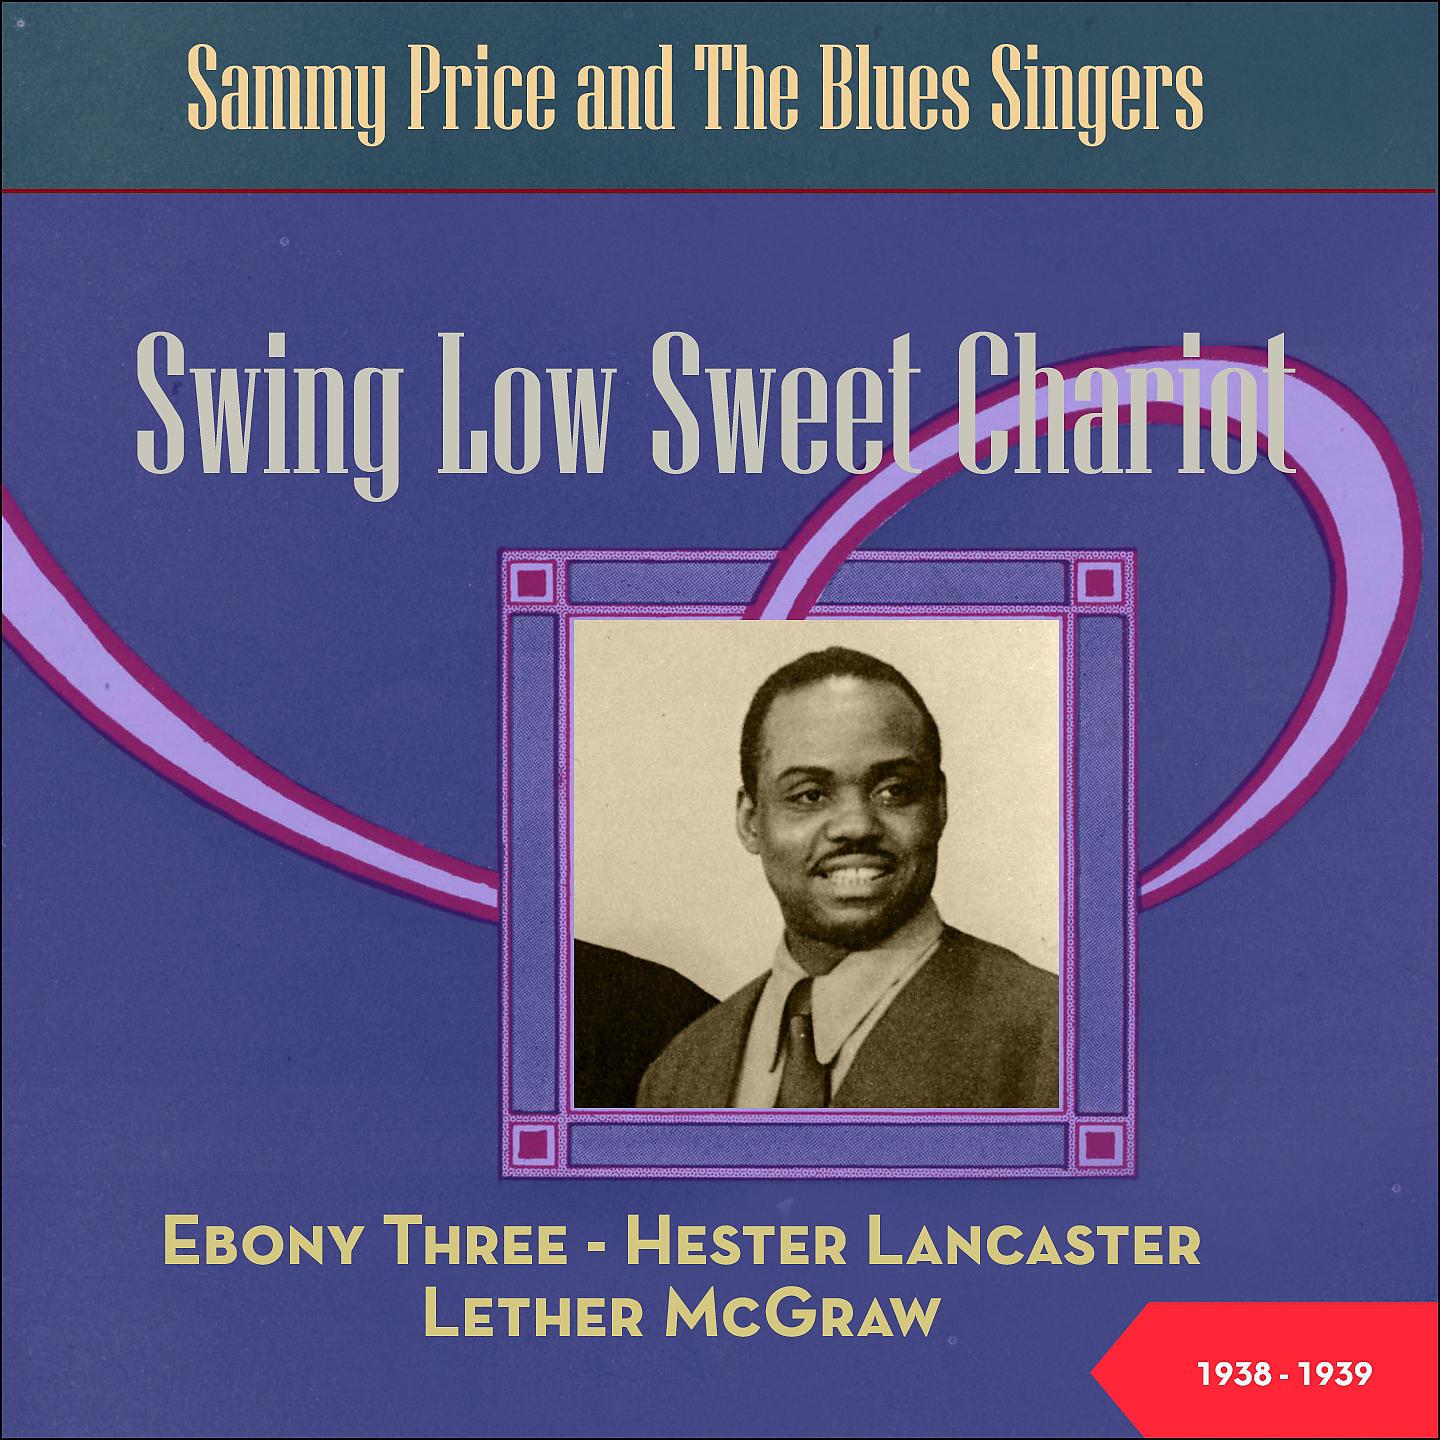 Постер альбома Swing Low Sweet Chariot - Sammy Price and The Blues Singers